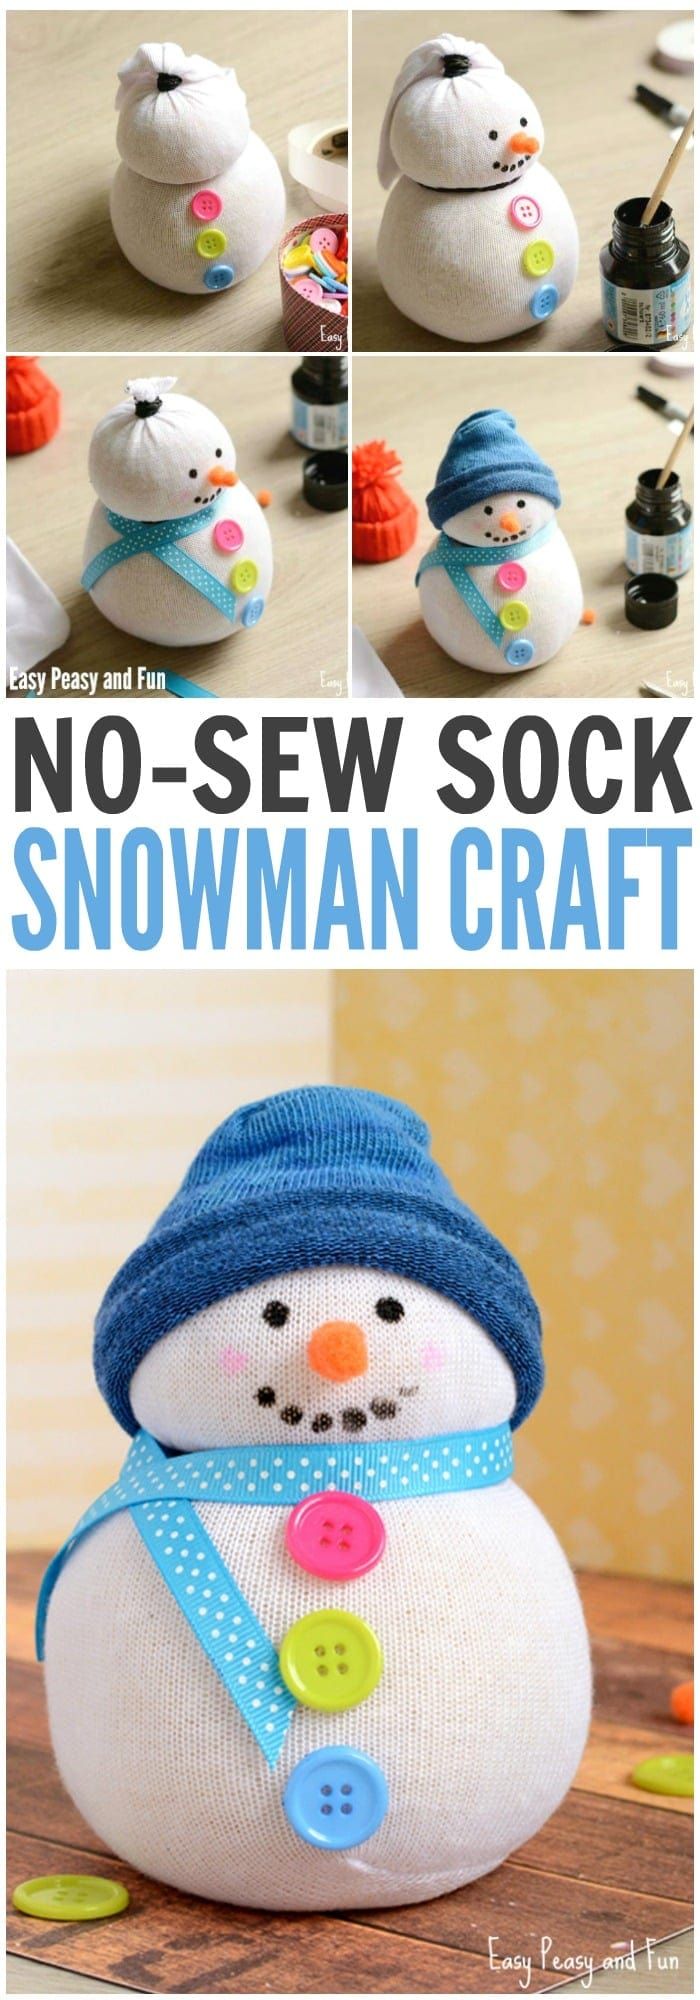 DIY Sock snowman with 3 buttons in the body and a blue cloth as hat